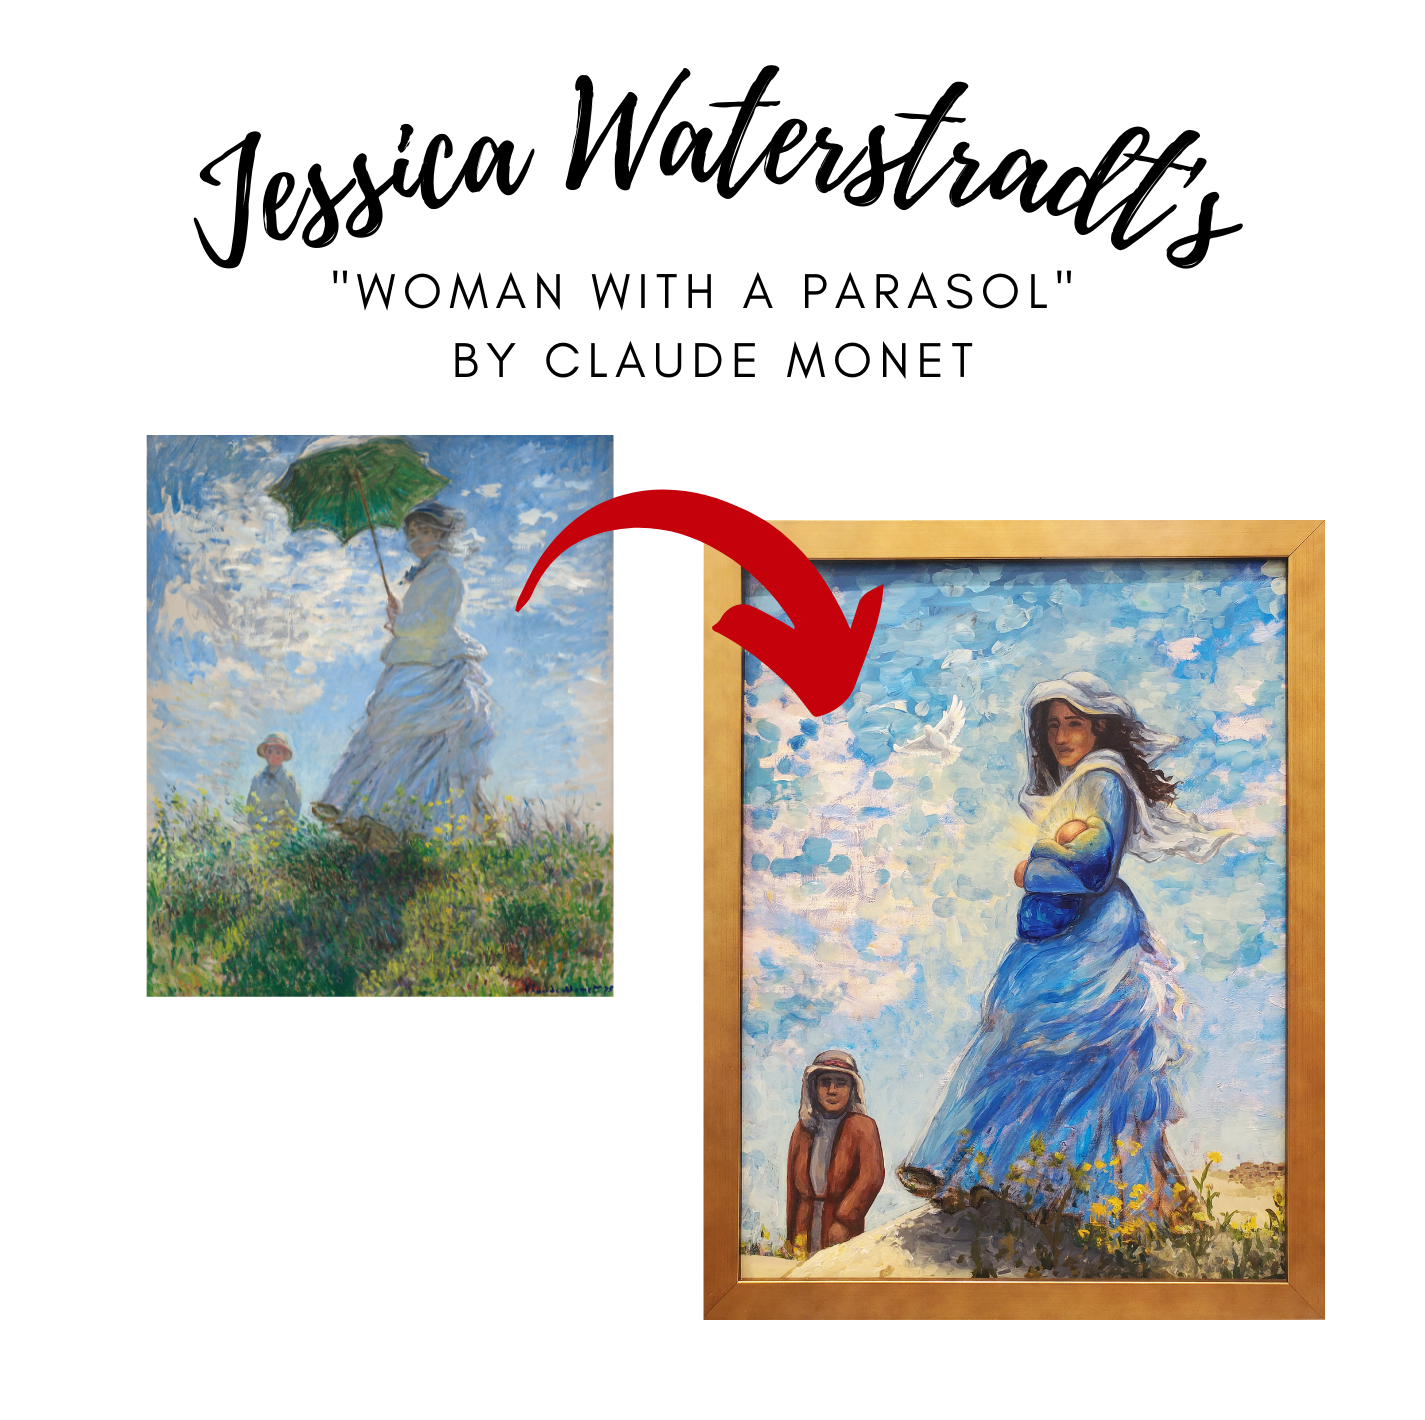 "Holiday-ified" Art Print of Claude Monet's "Woman with a Parasol" by Jessica Waterstradt